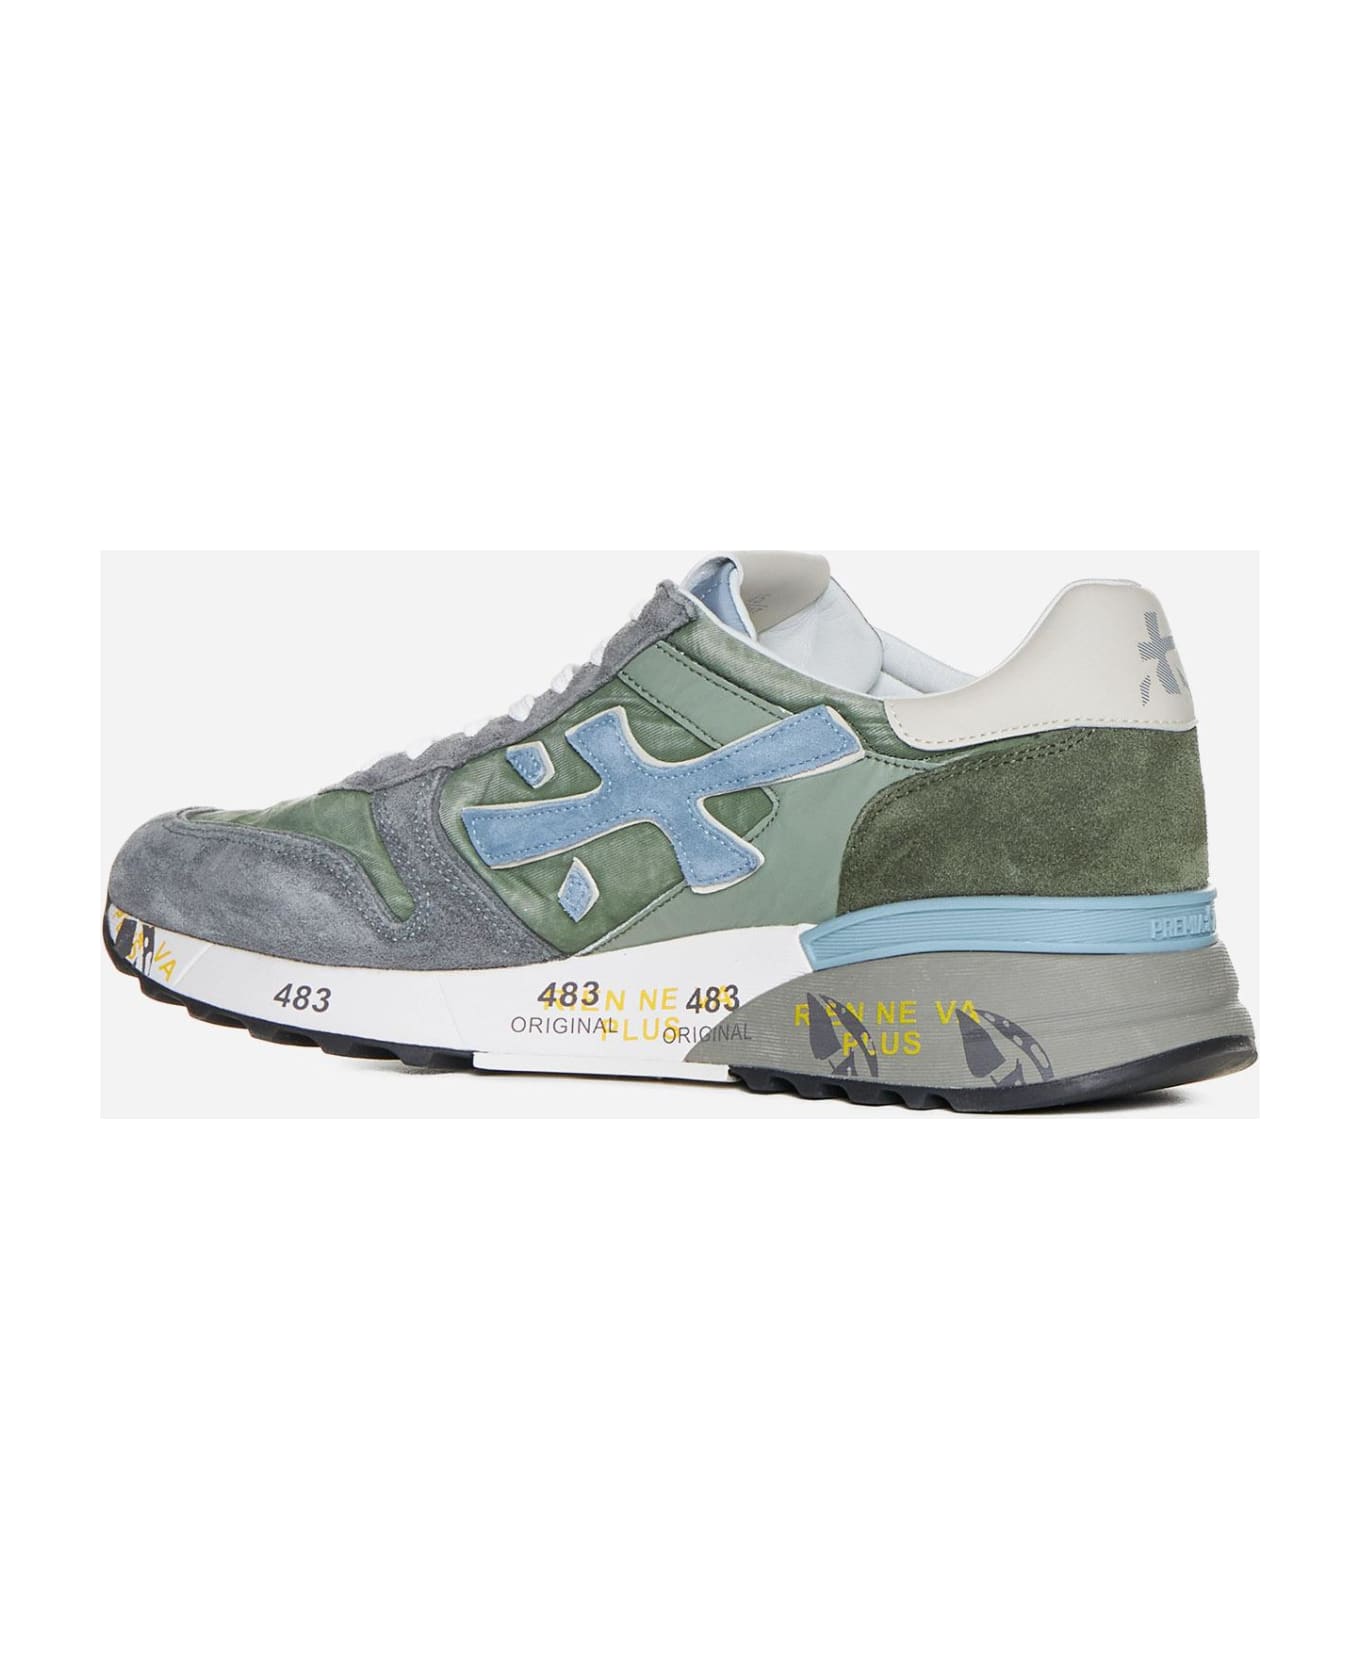 Premiata Mick Suede, Fabric And Leather Sneakers - Military green